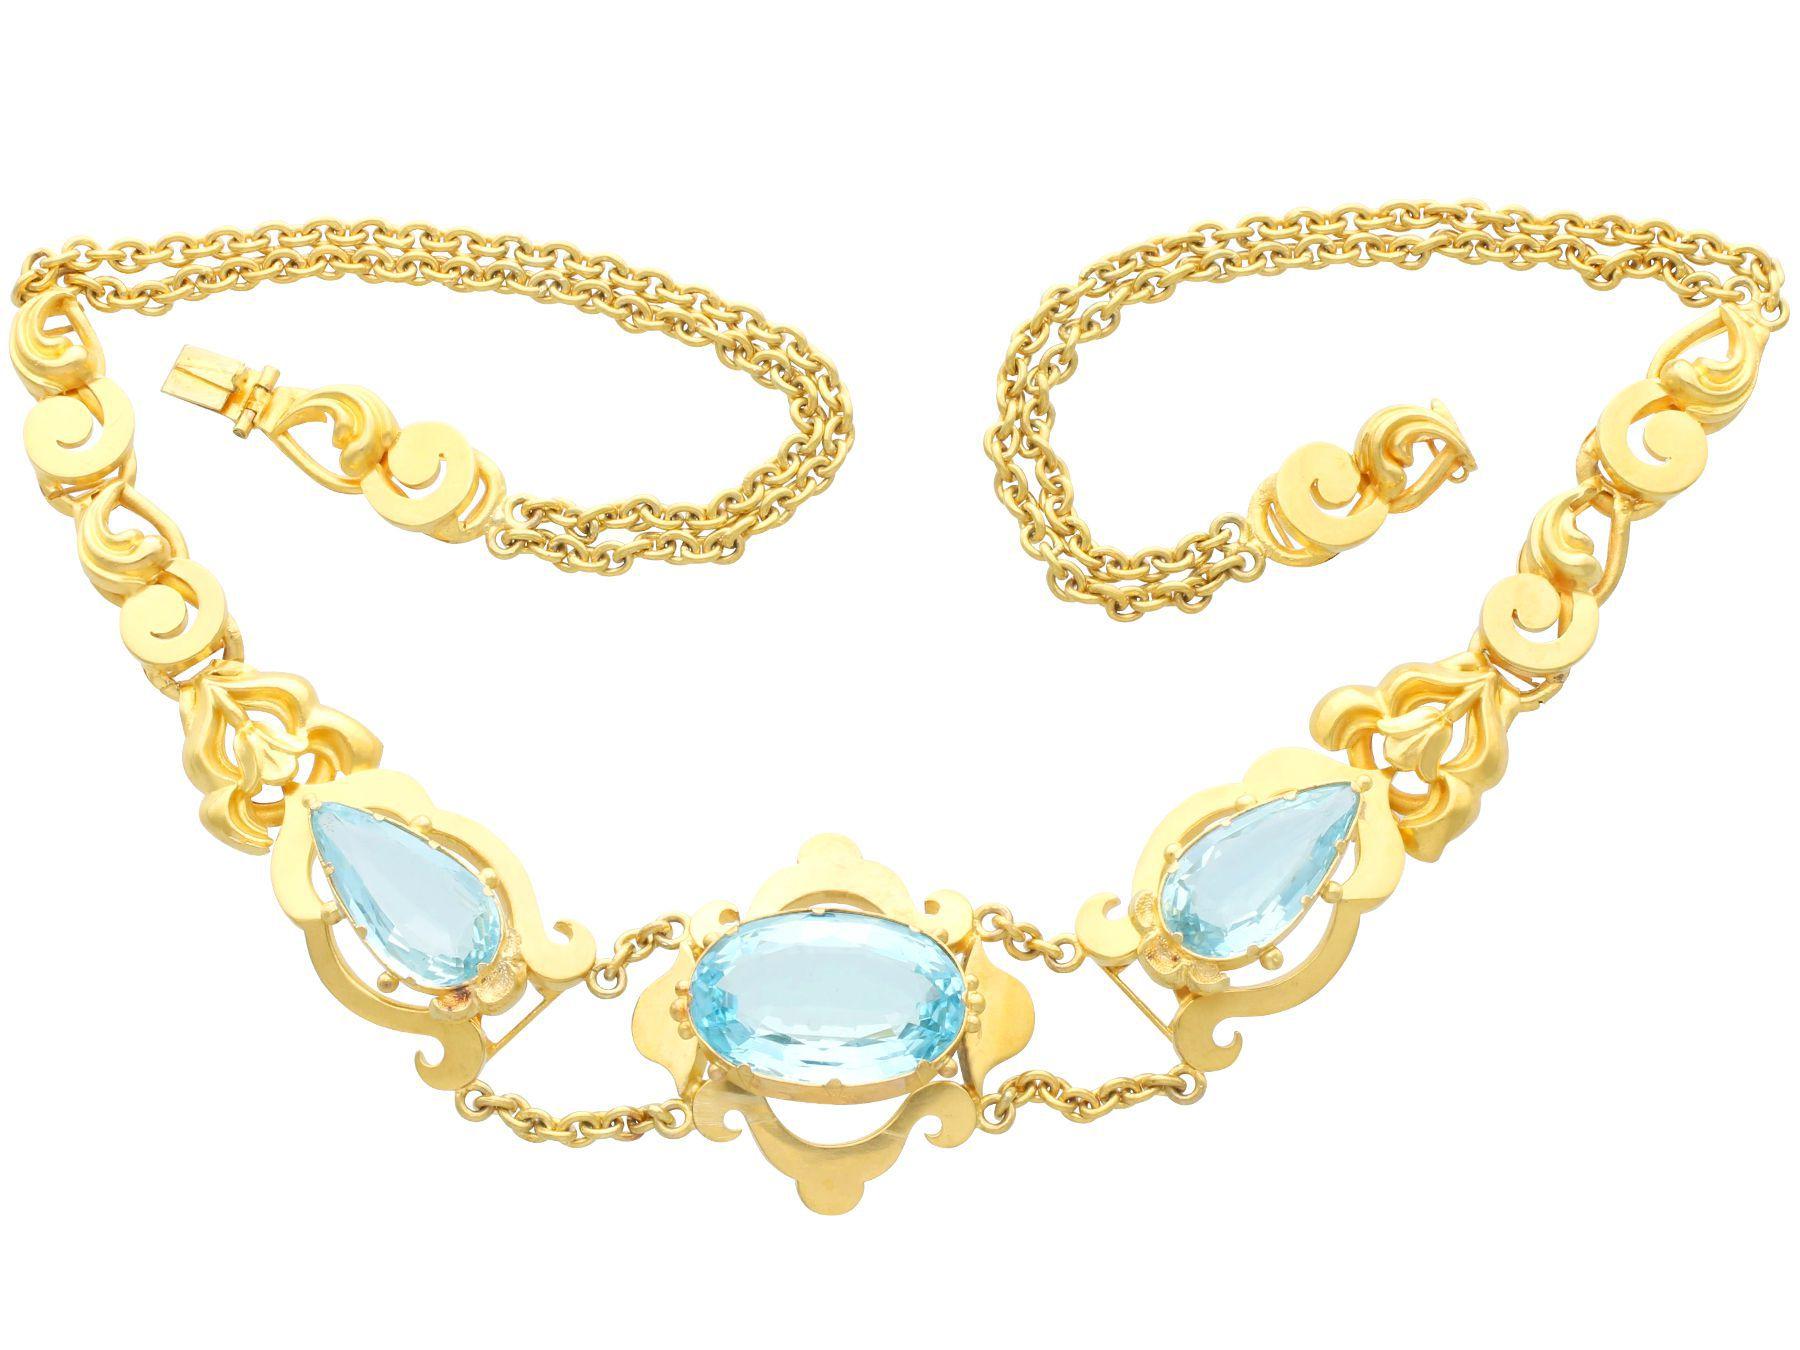 Oval Cut Antique 23.72ct Aquamarine and Yellow Gold Necklace Circa 1850